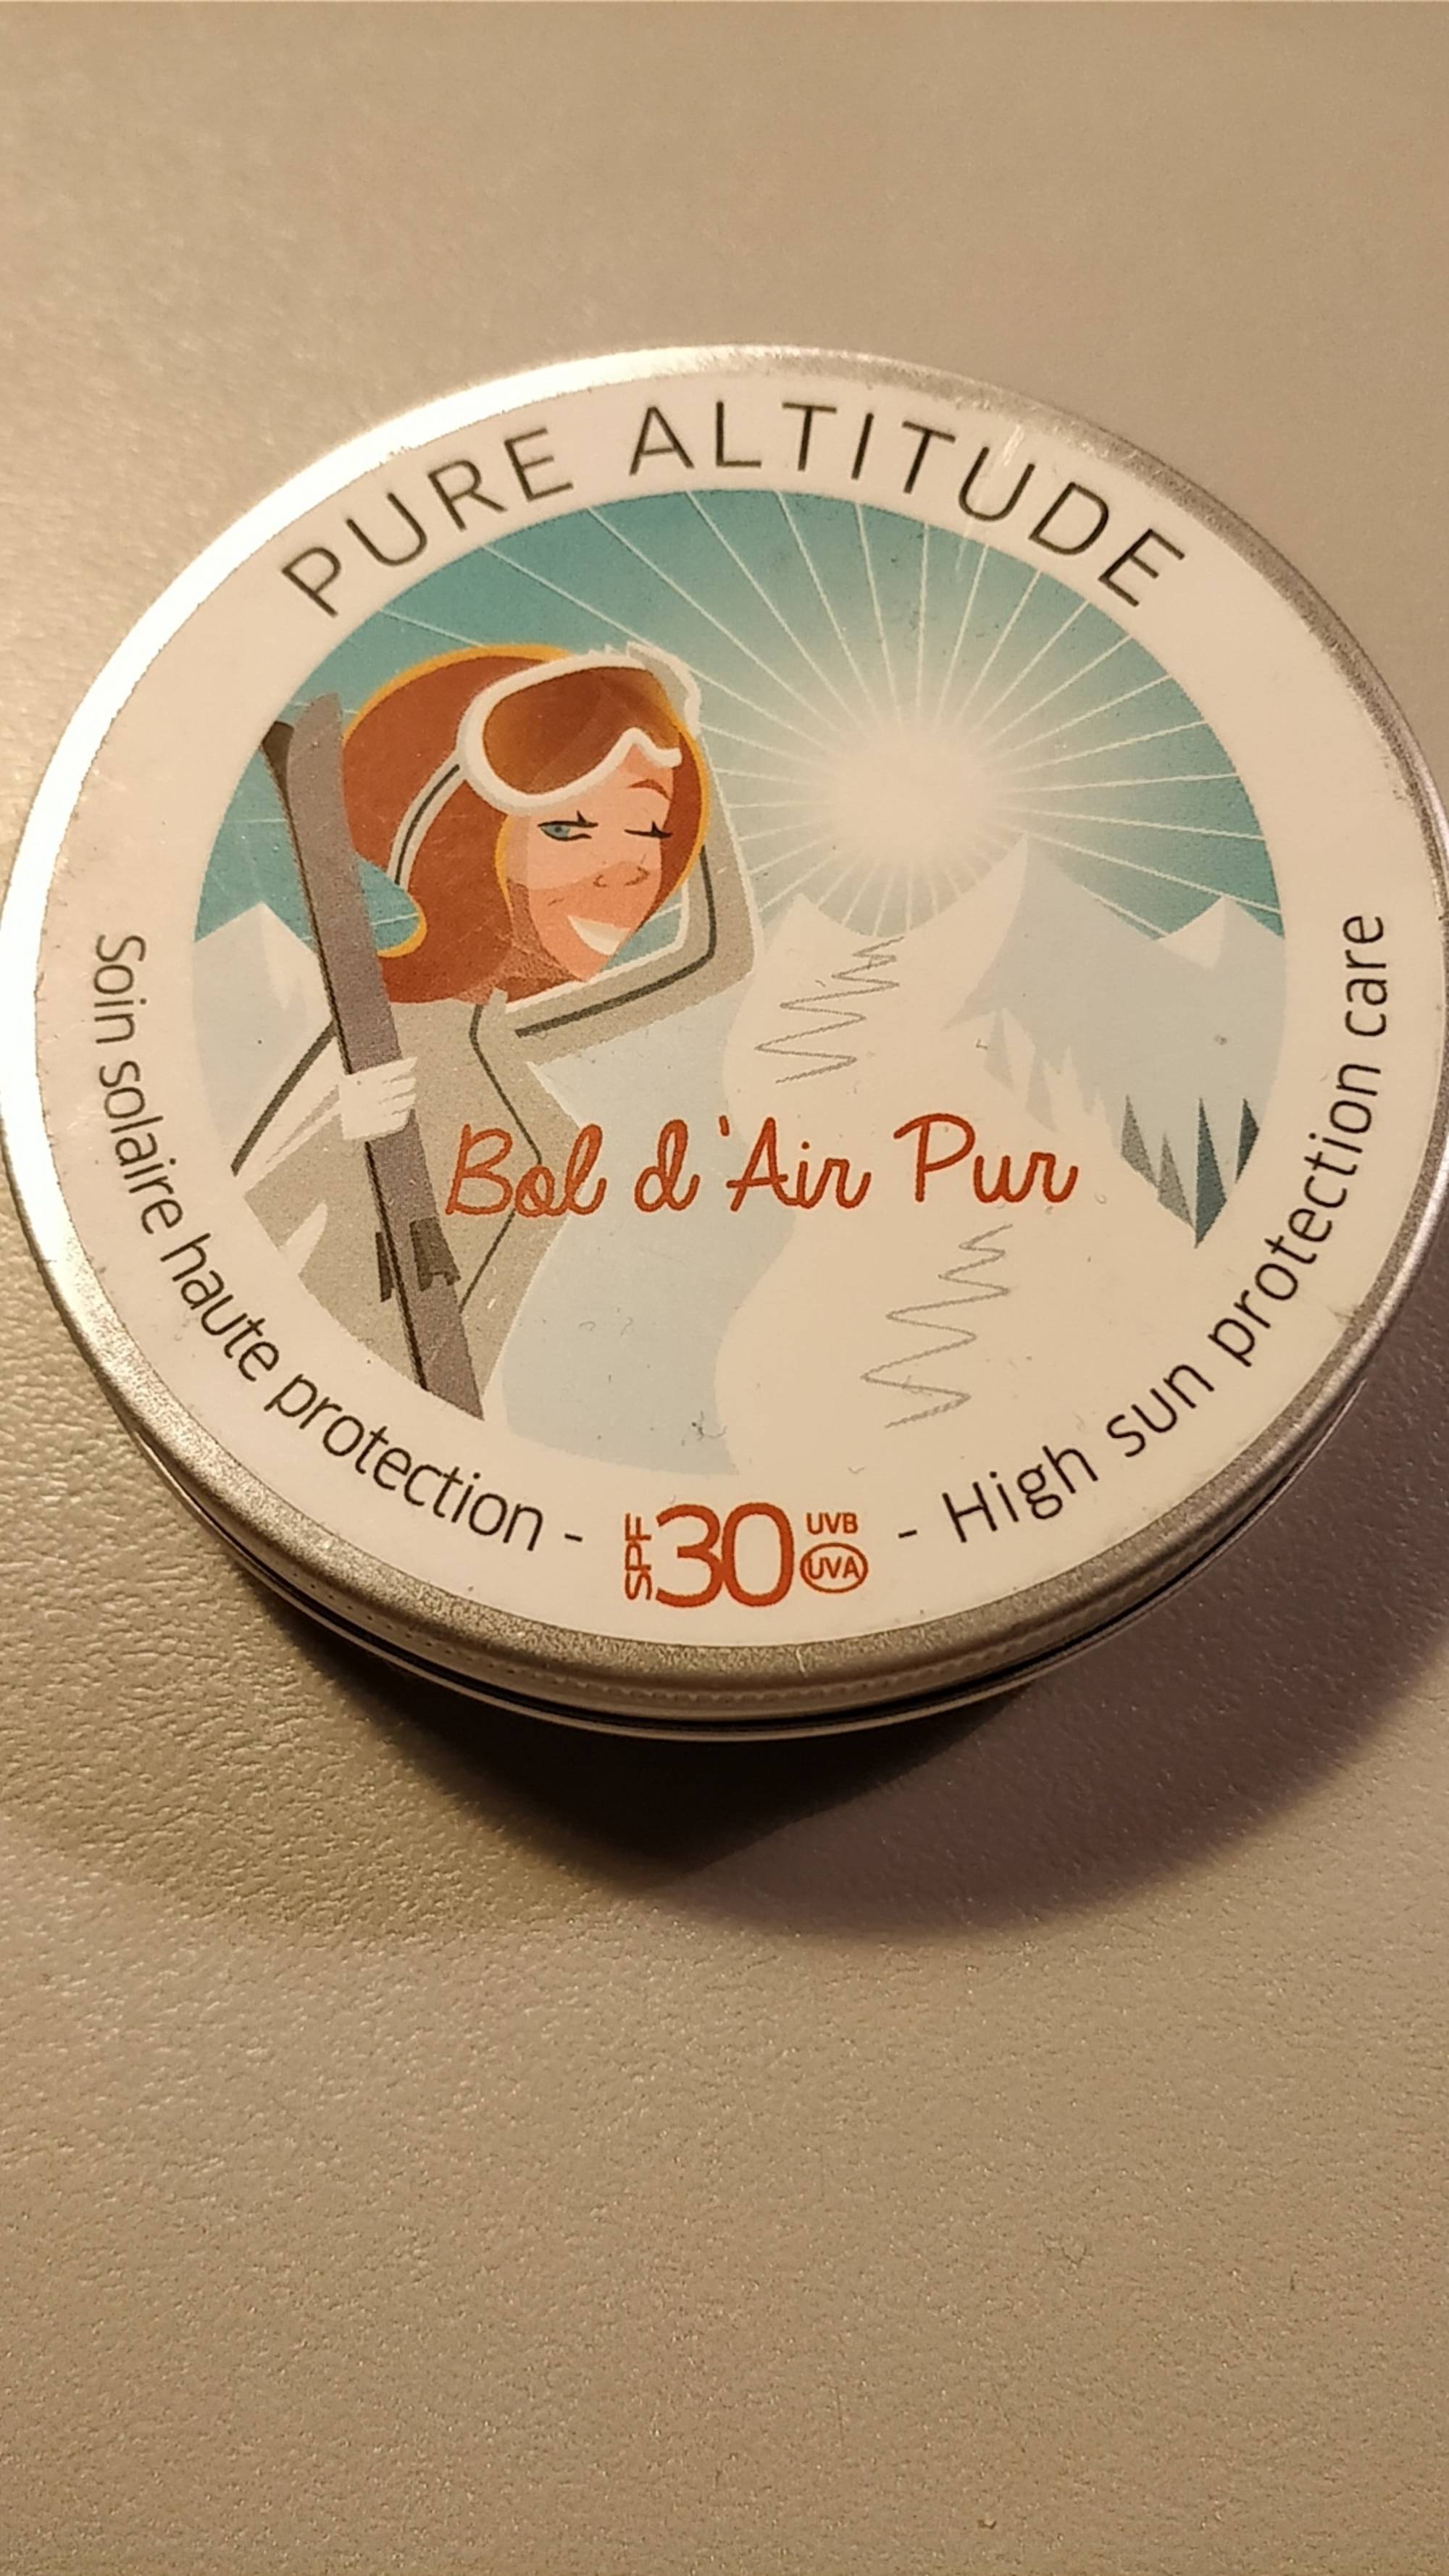 PURE ALTITUDE - Bol d'air pur - Soin solaire haute protection spf30